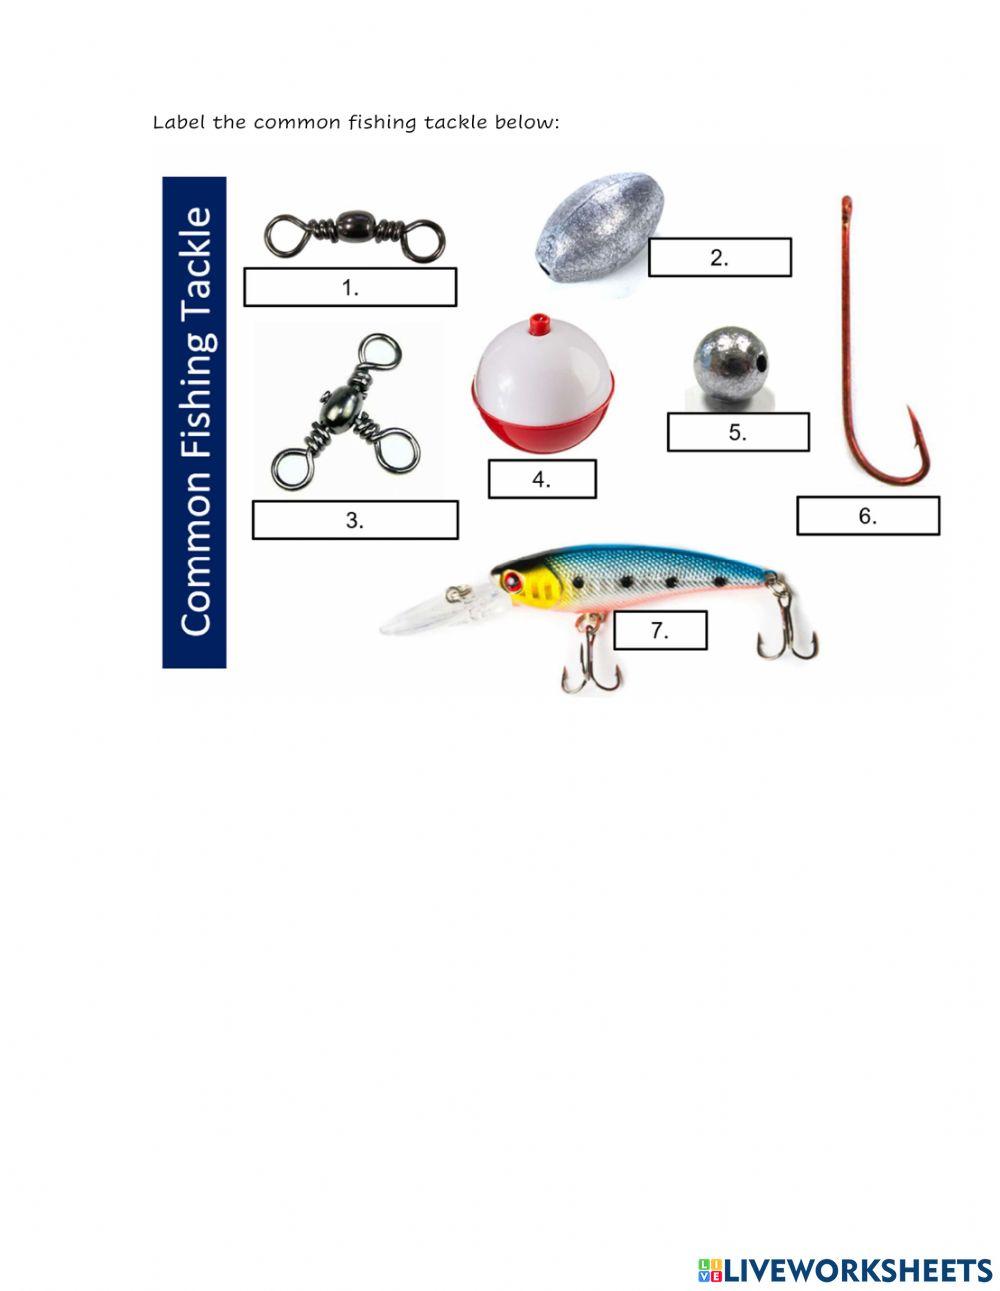 Fishing Equipment and Uses worksheet